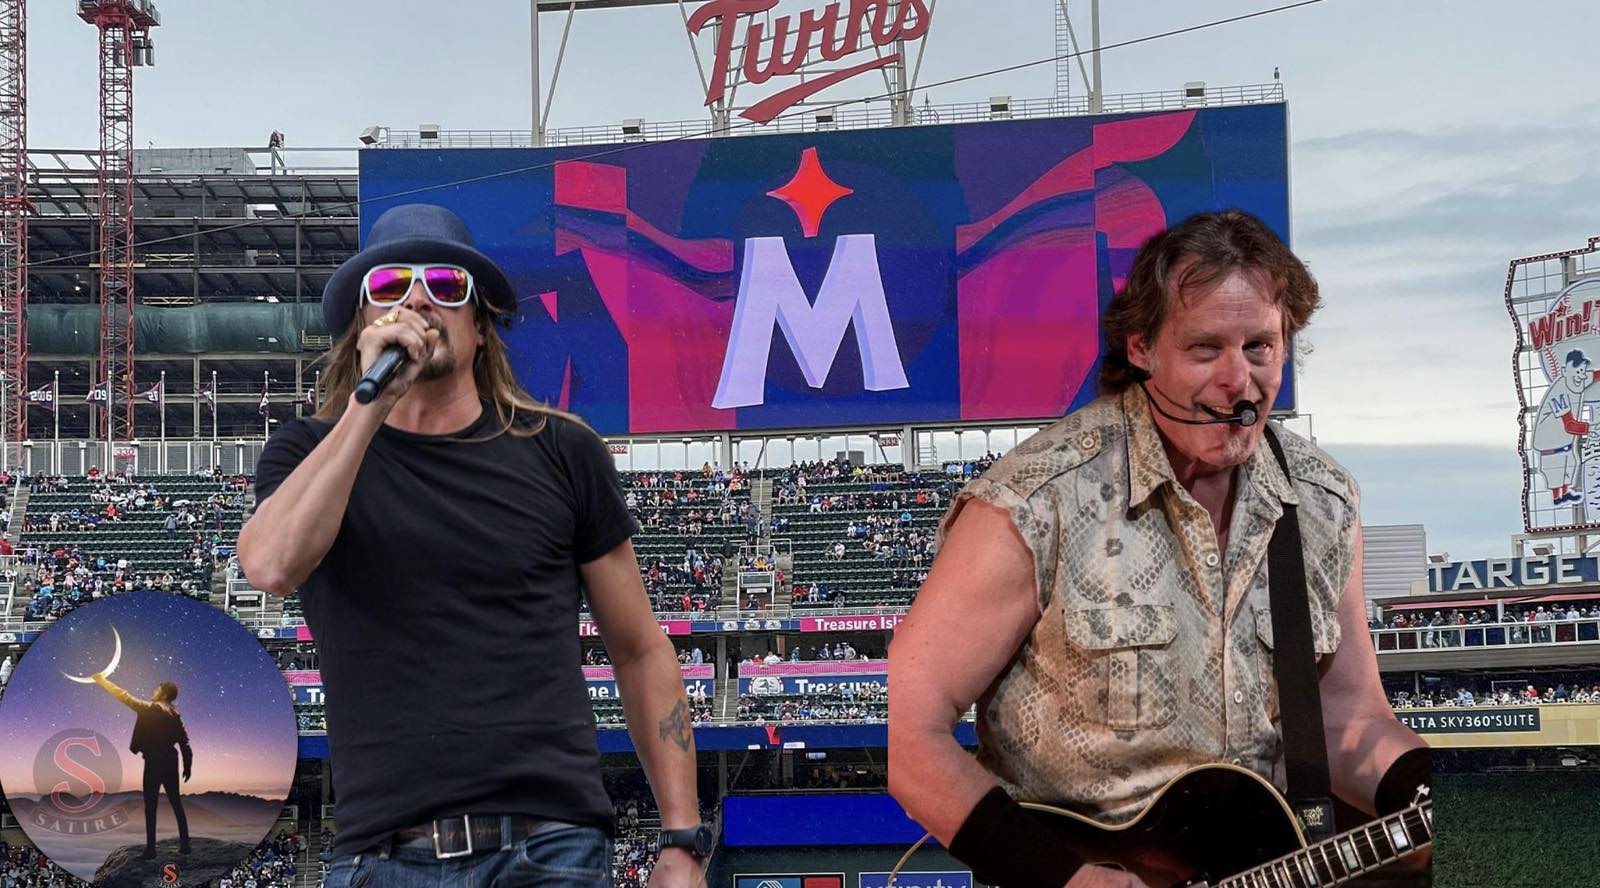 Ted Nugent and Kid Rock Join Forces for a Raw and Honest Variety Show: “No Fluff, No Fiction”